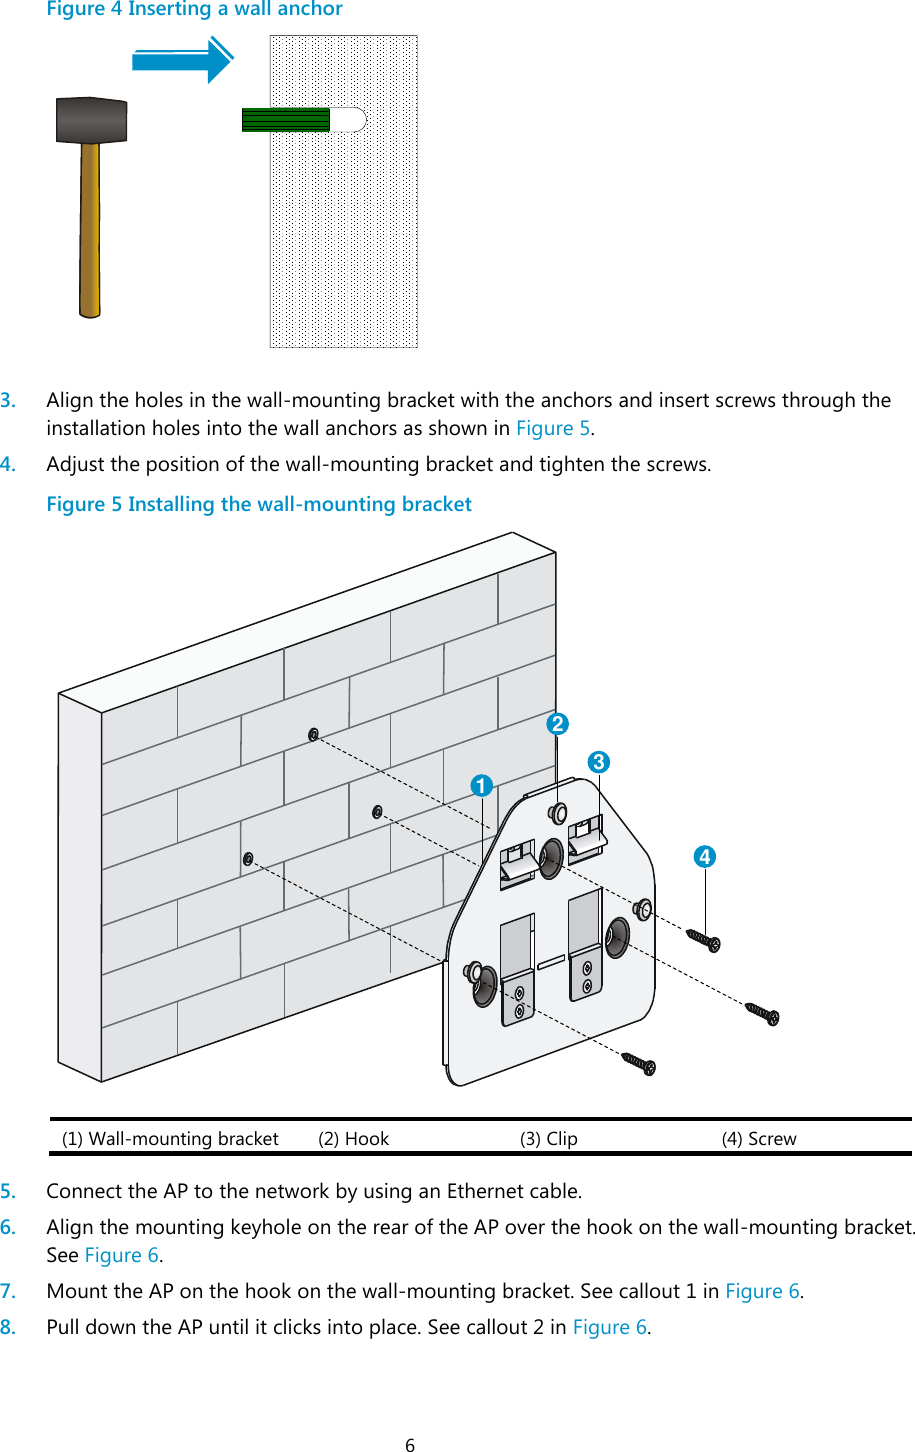  6 Figure 4 Inserting a wall anchor   3. Align the holes in the wall-mounting bracket with the anchors and insert screws through the installation holes into the wall anchors as shown in Figure 5. 4. Adjust the position of the wall-mounting bracket and tighten the screws. Figure 5 Installing the wall-mounting bracket  (1) Wall-mounting bracket (2) Hook (3) Clip (4) Screw  5. Connect the AP to the network by using an Ethernet cable. 6. Align the mounting keyhole on the rear of the AP over the hook on the wall-mounting bracket. See Figure 6. 7. Mount the AP on the hook on the wall-mounting bracket. See callout 1 in Figure 6. 8. Pull down the AP until it clicks into place. See callout 2 in Figure 6. 1234